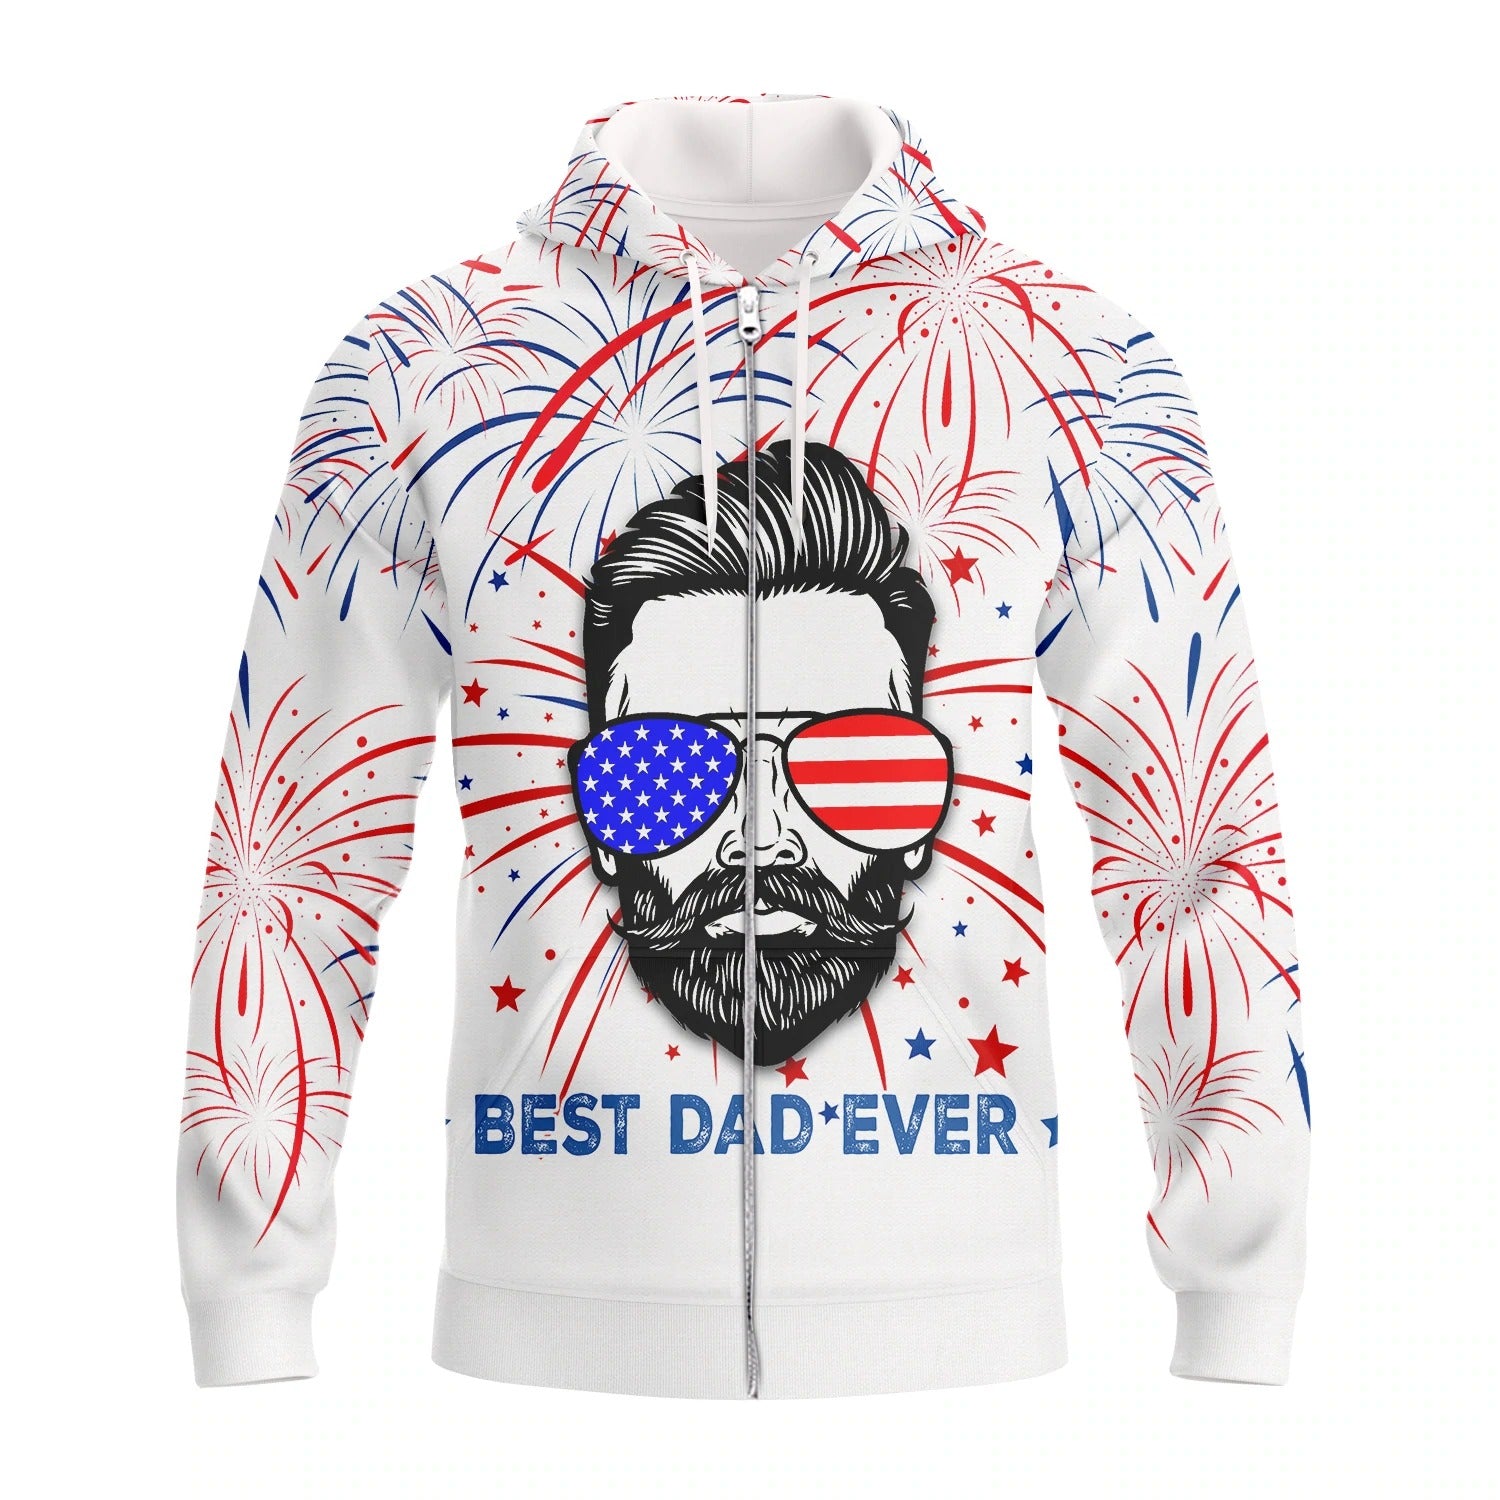 Independence Day Is Coming Best Dad Ever 3D Full Print Shirts Hoodie/ Best Dad Shirt 4Th July American Tee Shirt